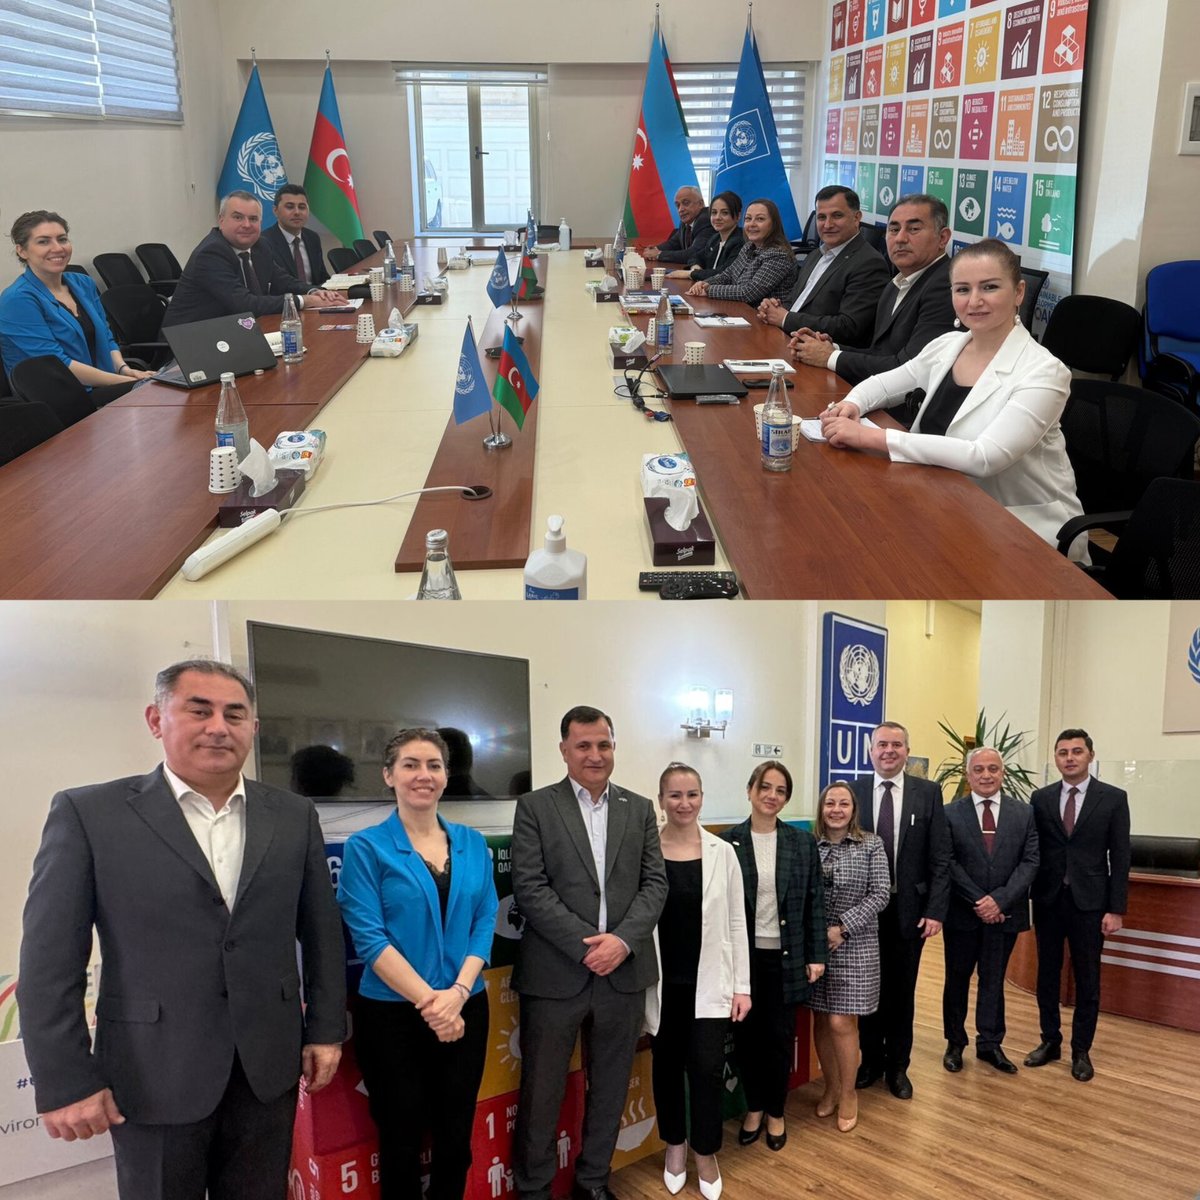 United Nations Volunteers HQ mission met with colleagues from #UNDPAzerbaijan to discuss ways to support UNDP projects with UNV solutions. #UNVAzerbaijan #UNVolunteers @UNVolunteers @UNVEurasia @UNDPAzerbaijan